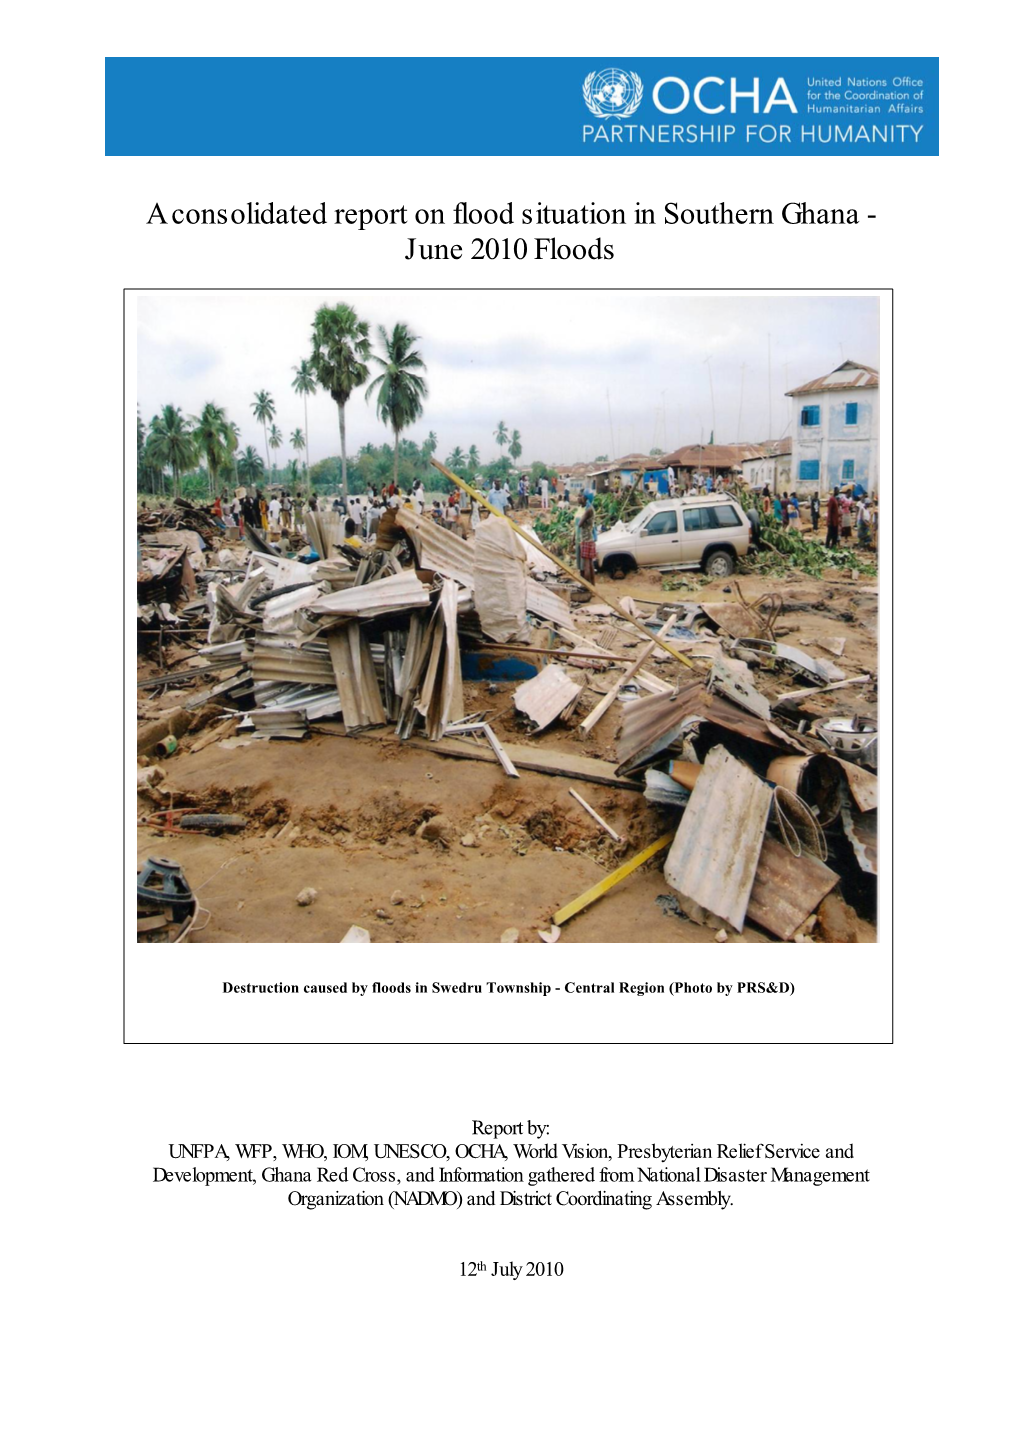 A Consolidated Report on Flood Situation in Southern Ghana - June 2010 Floods